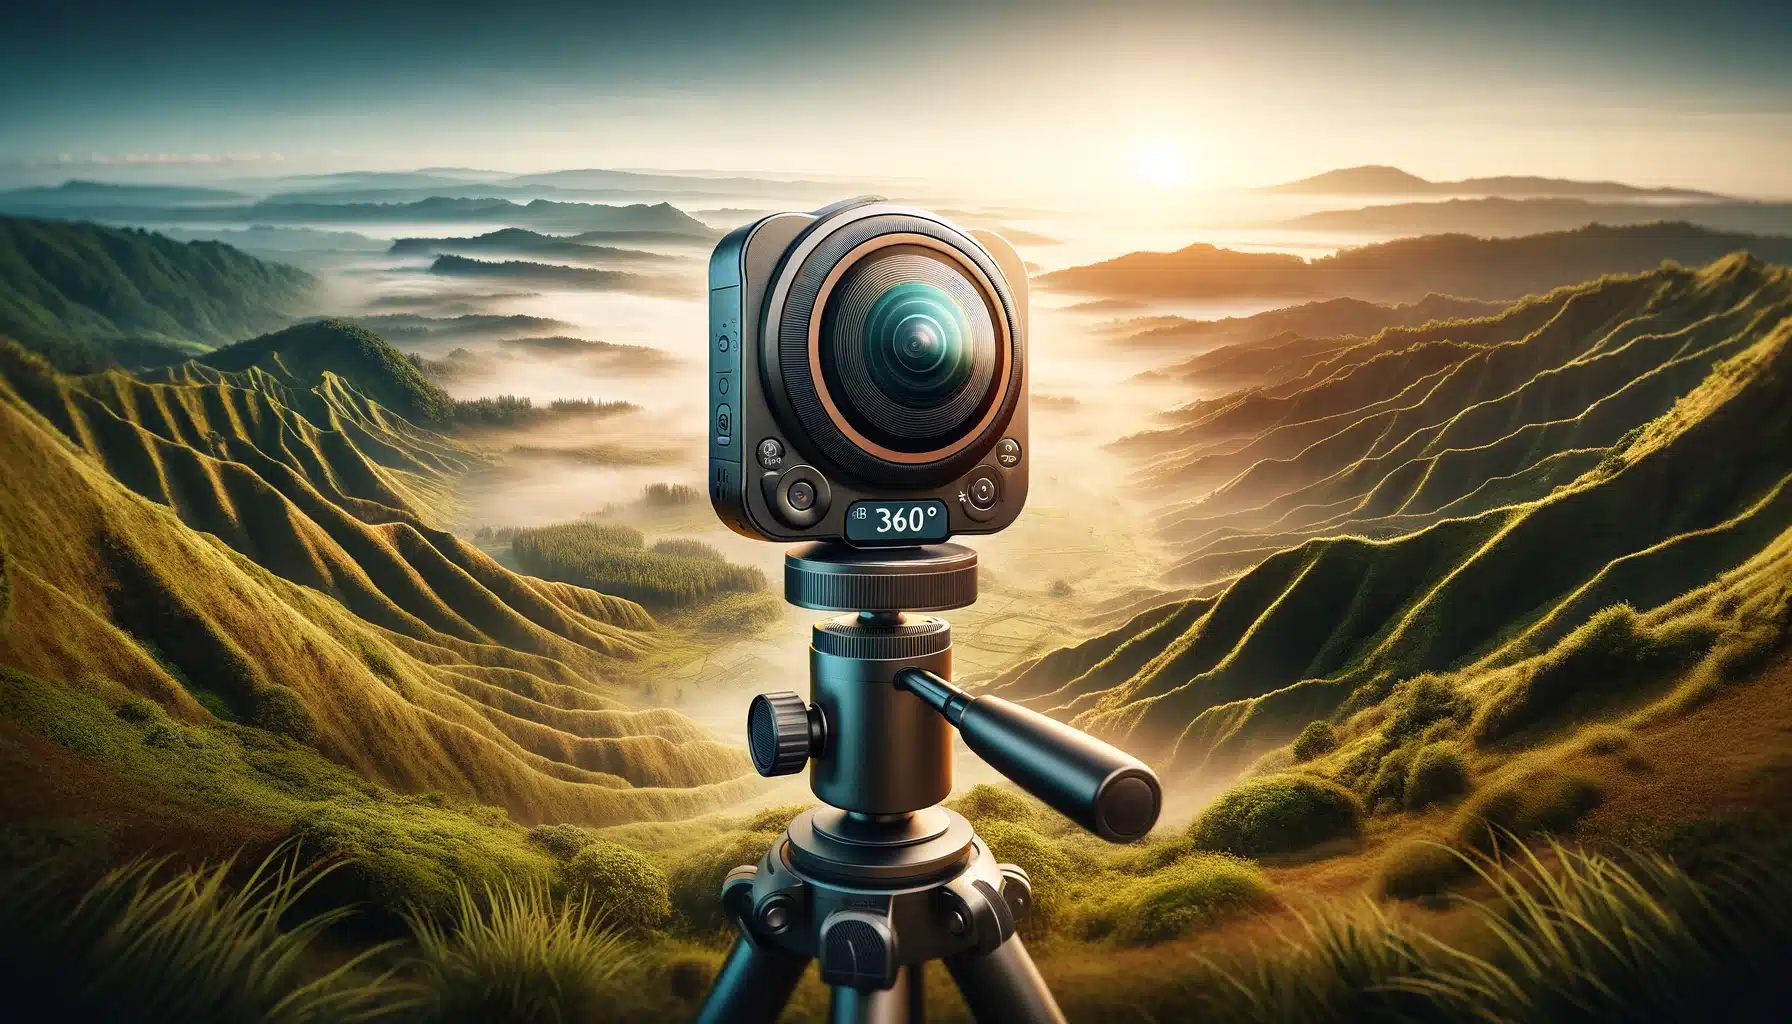 Cycloidal camera on a tripod in a landscape setting, apprehending panoramic views of rolling hills, forests, and skyline.